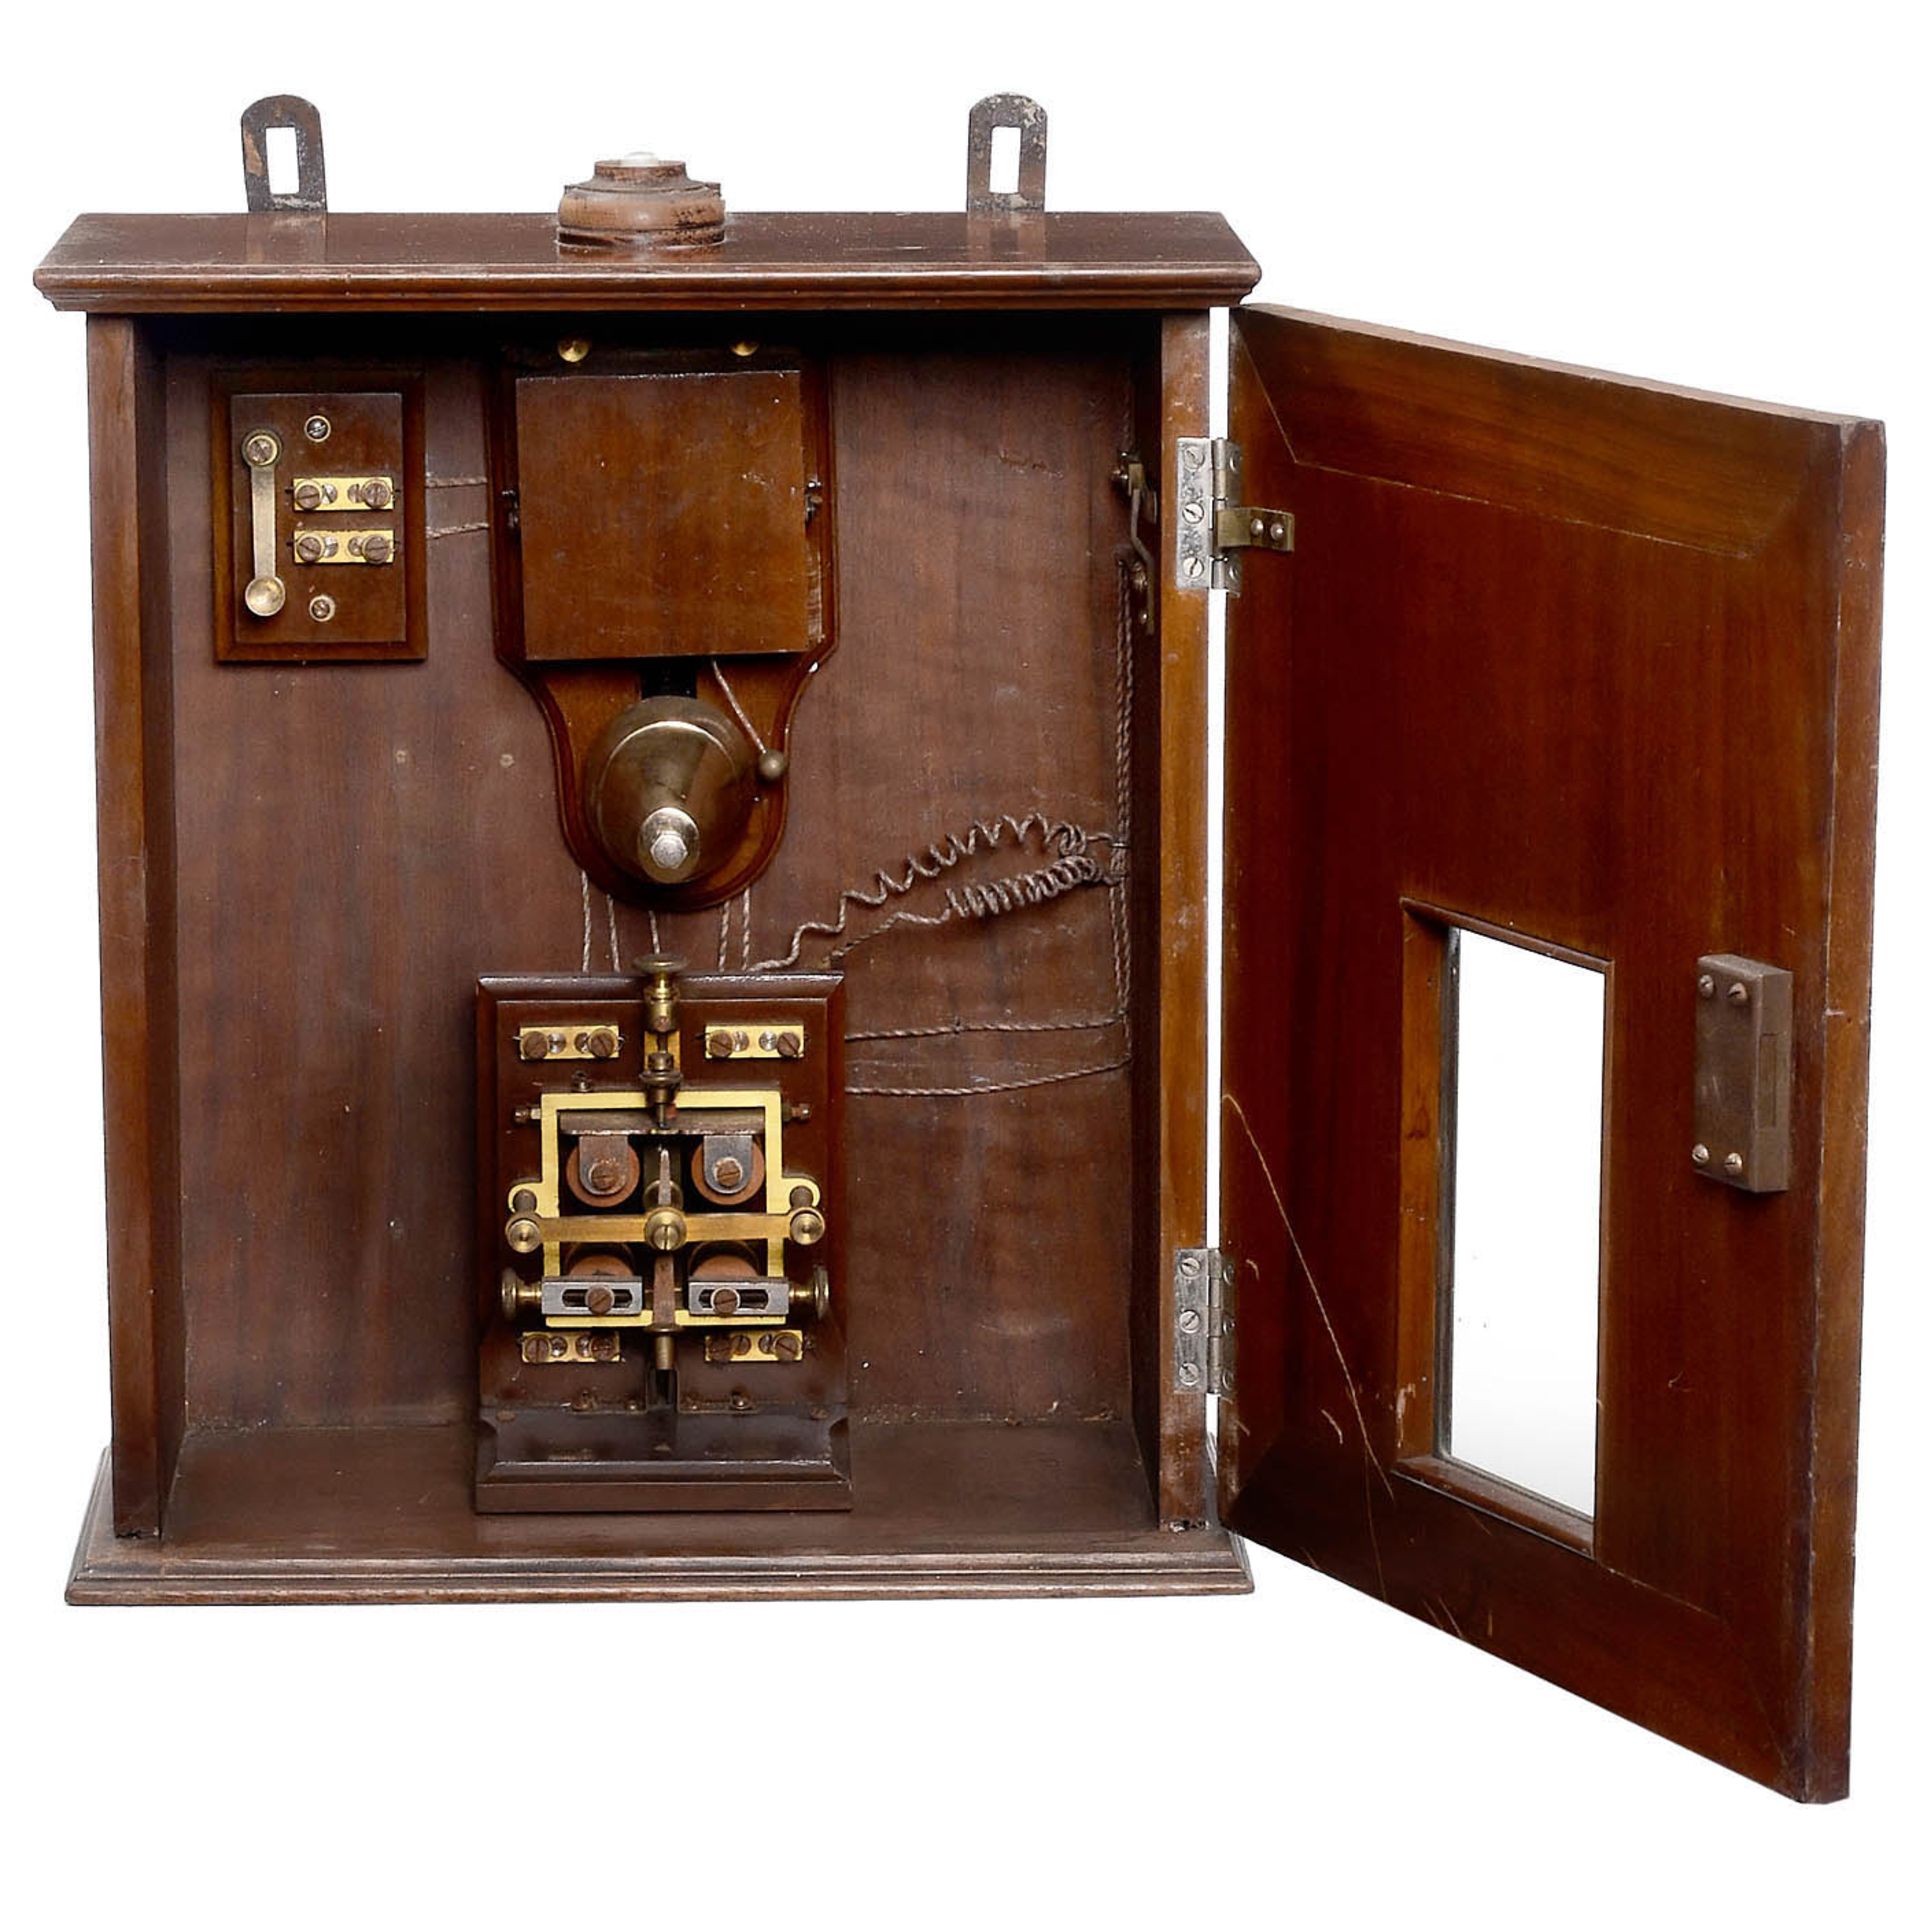 Electrical Switch Box for Telecommunication, c. 1900 - Image 2 of 2